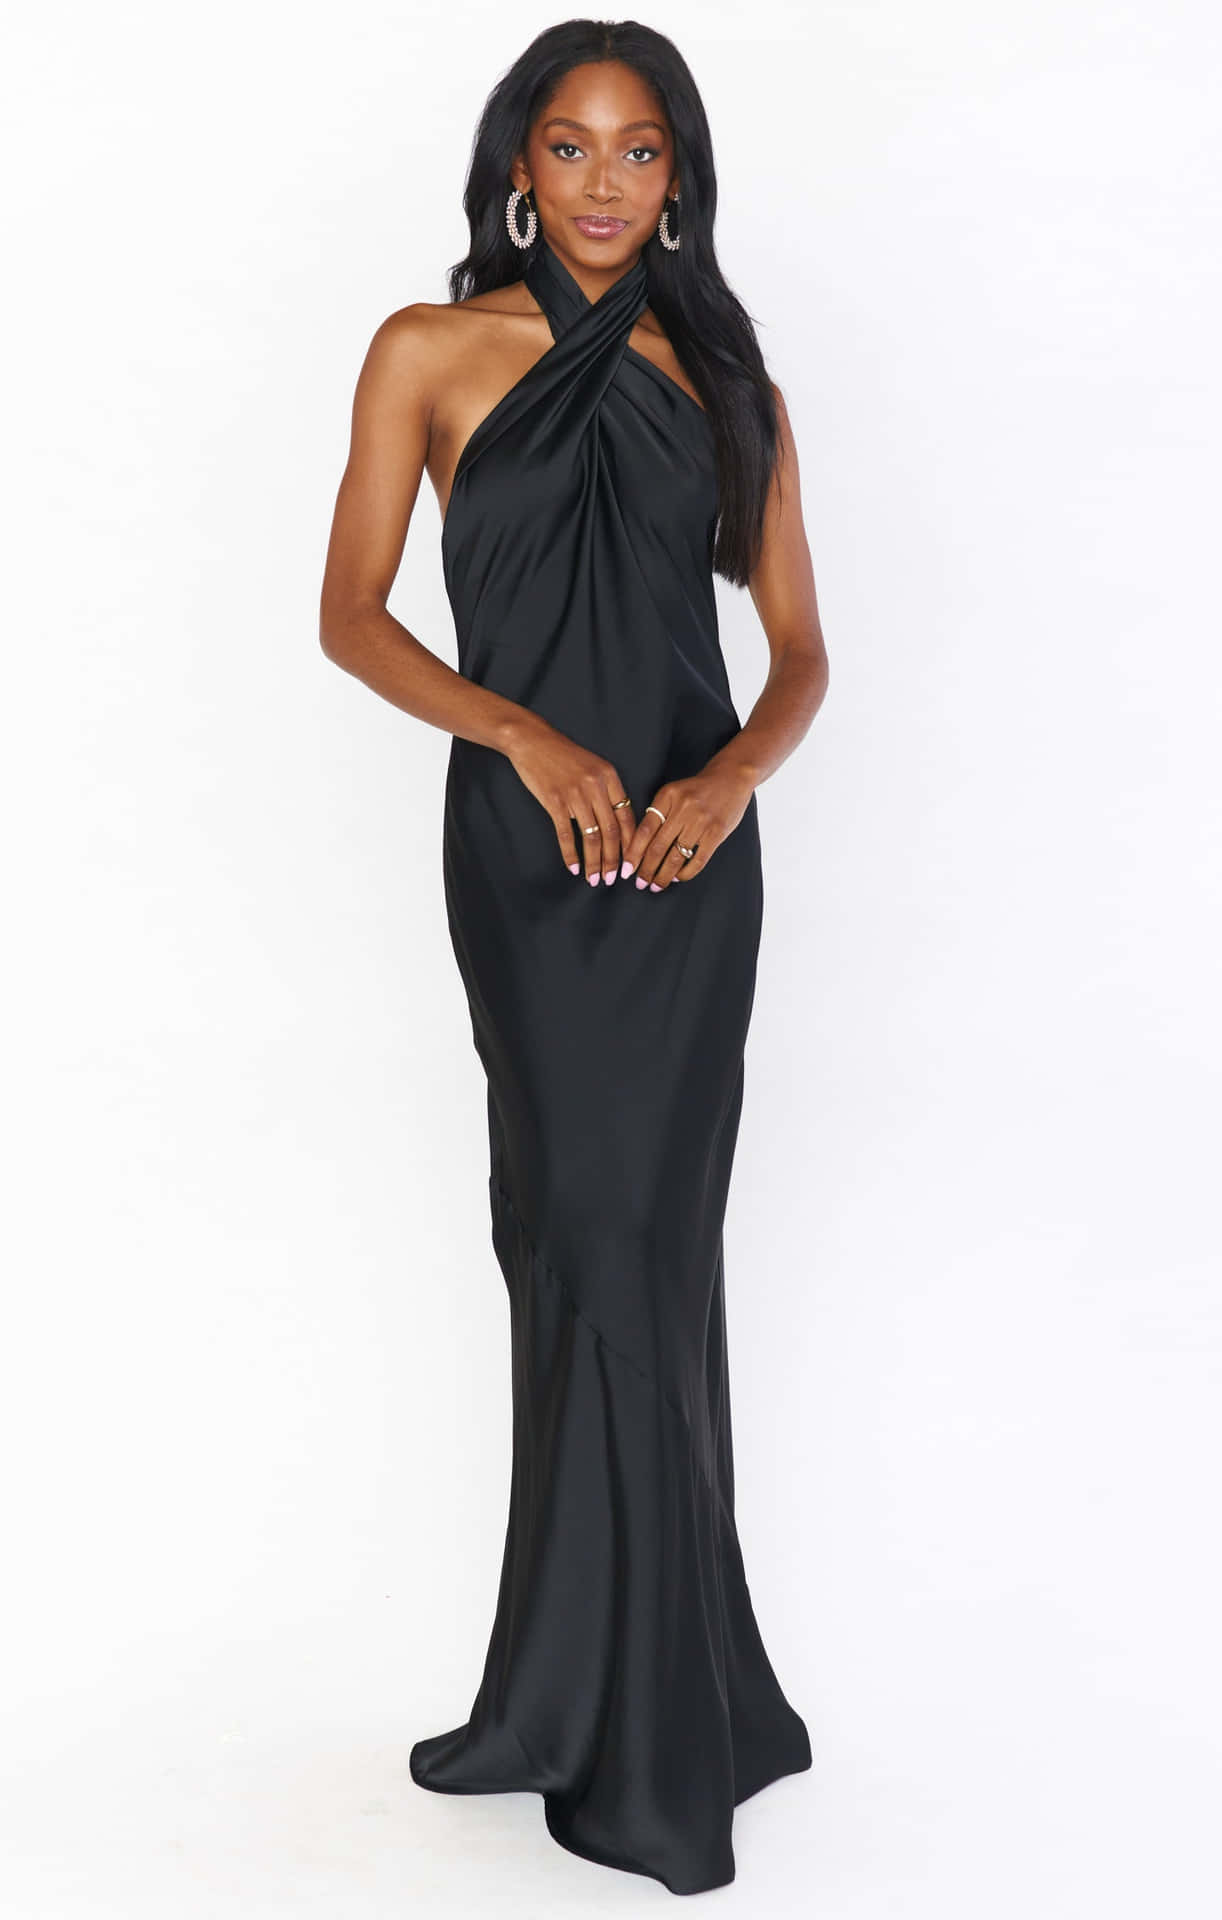 Woman In Black Satin Long Dress Picture